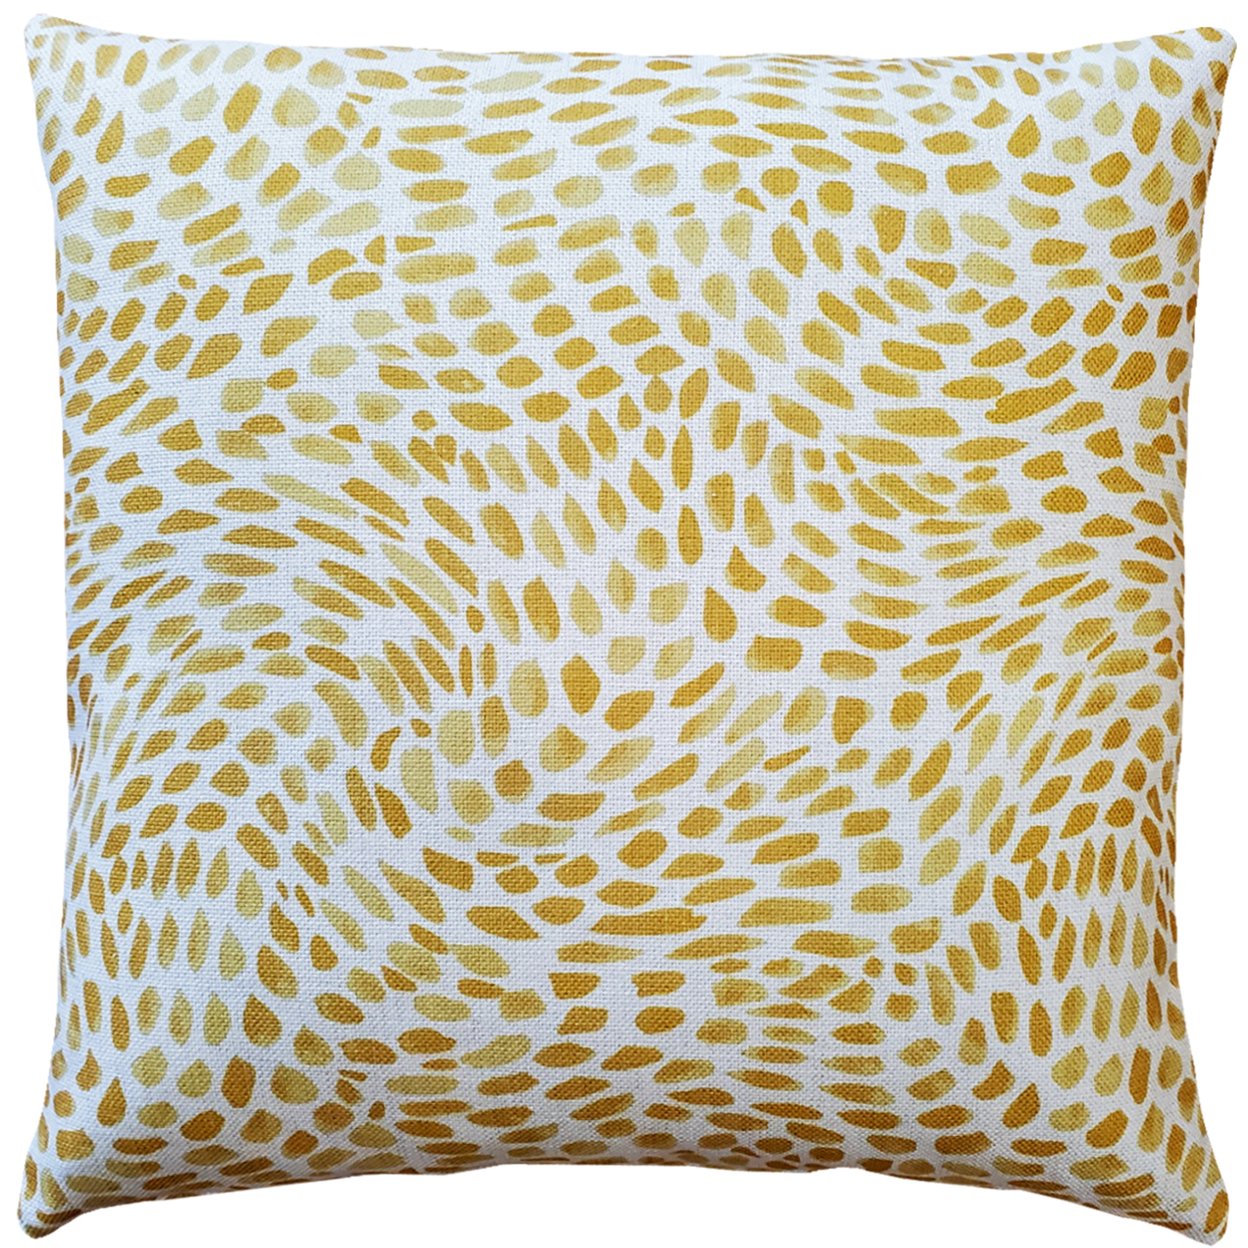 Matisse Dots Golden Yellow Throw Pillow 19x19 Inches Square, Complete Pillow With Polyfill Pillow Insert